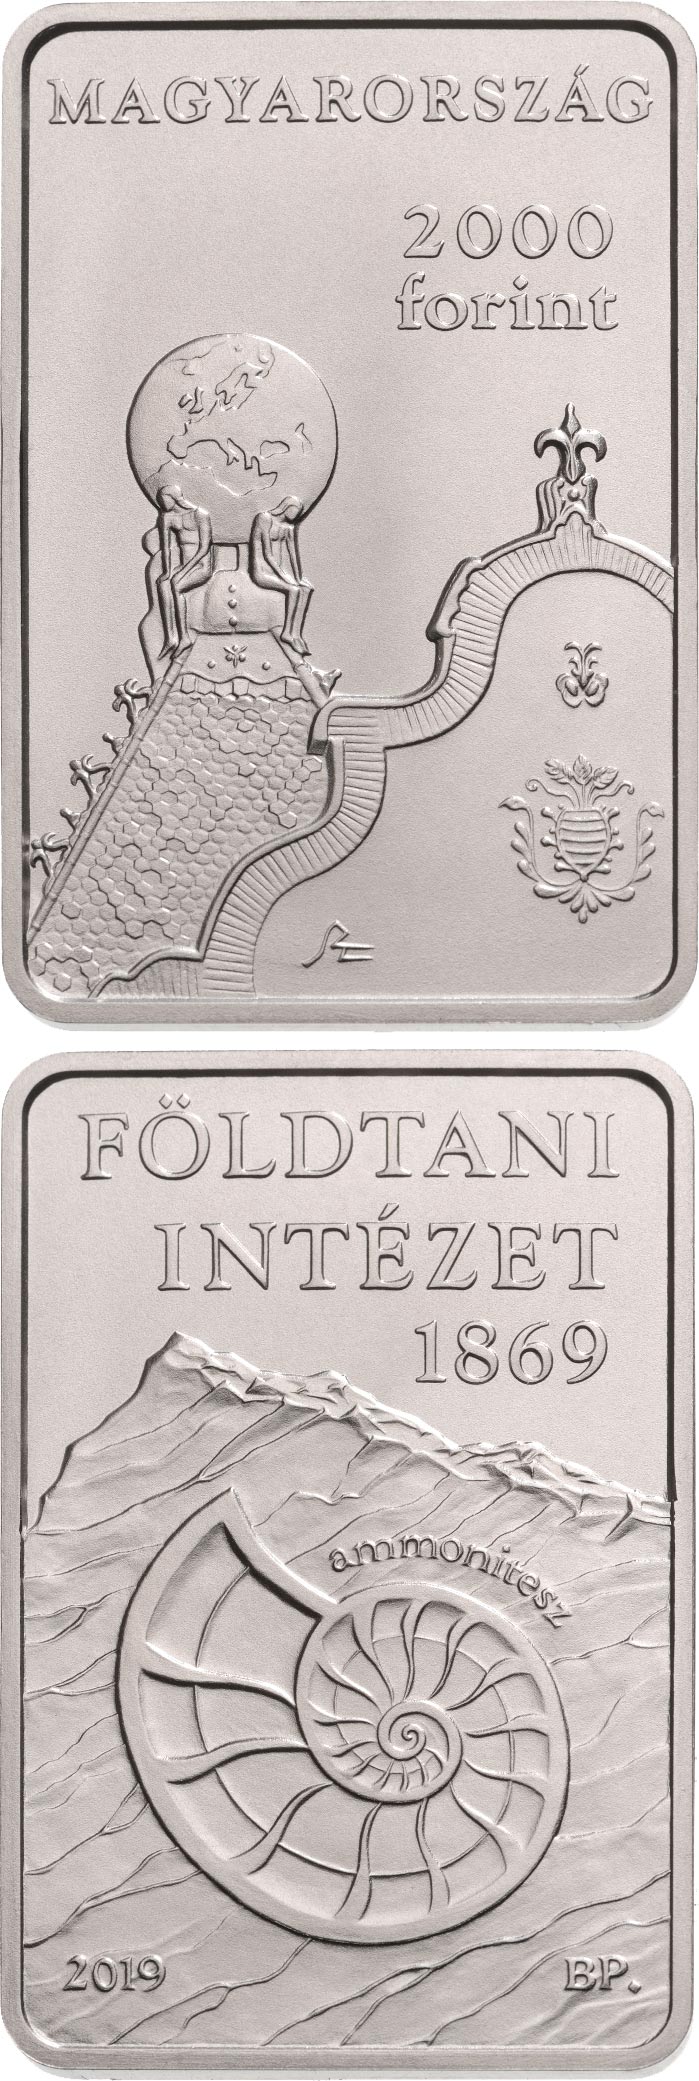 Image of 2000 forint coin - The 150th anniversary of the foundation
of the Geological Institute | Hungary 2019.  The Copper–Nickel (CuNi) coin is of BU quality.